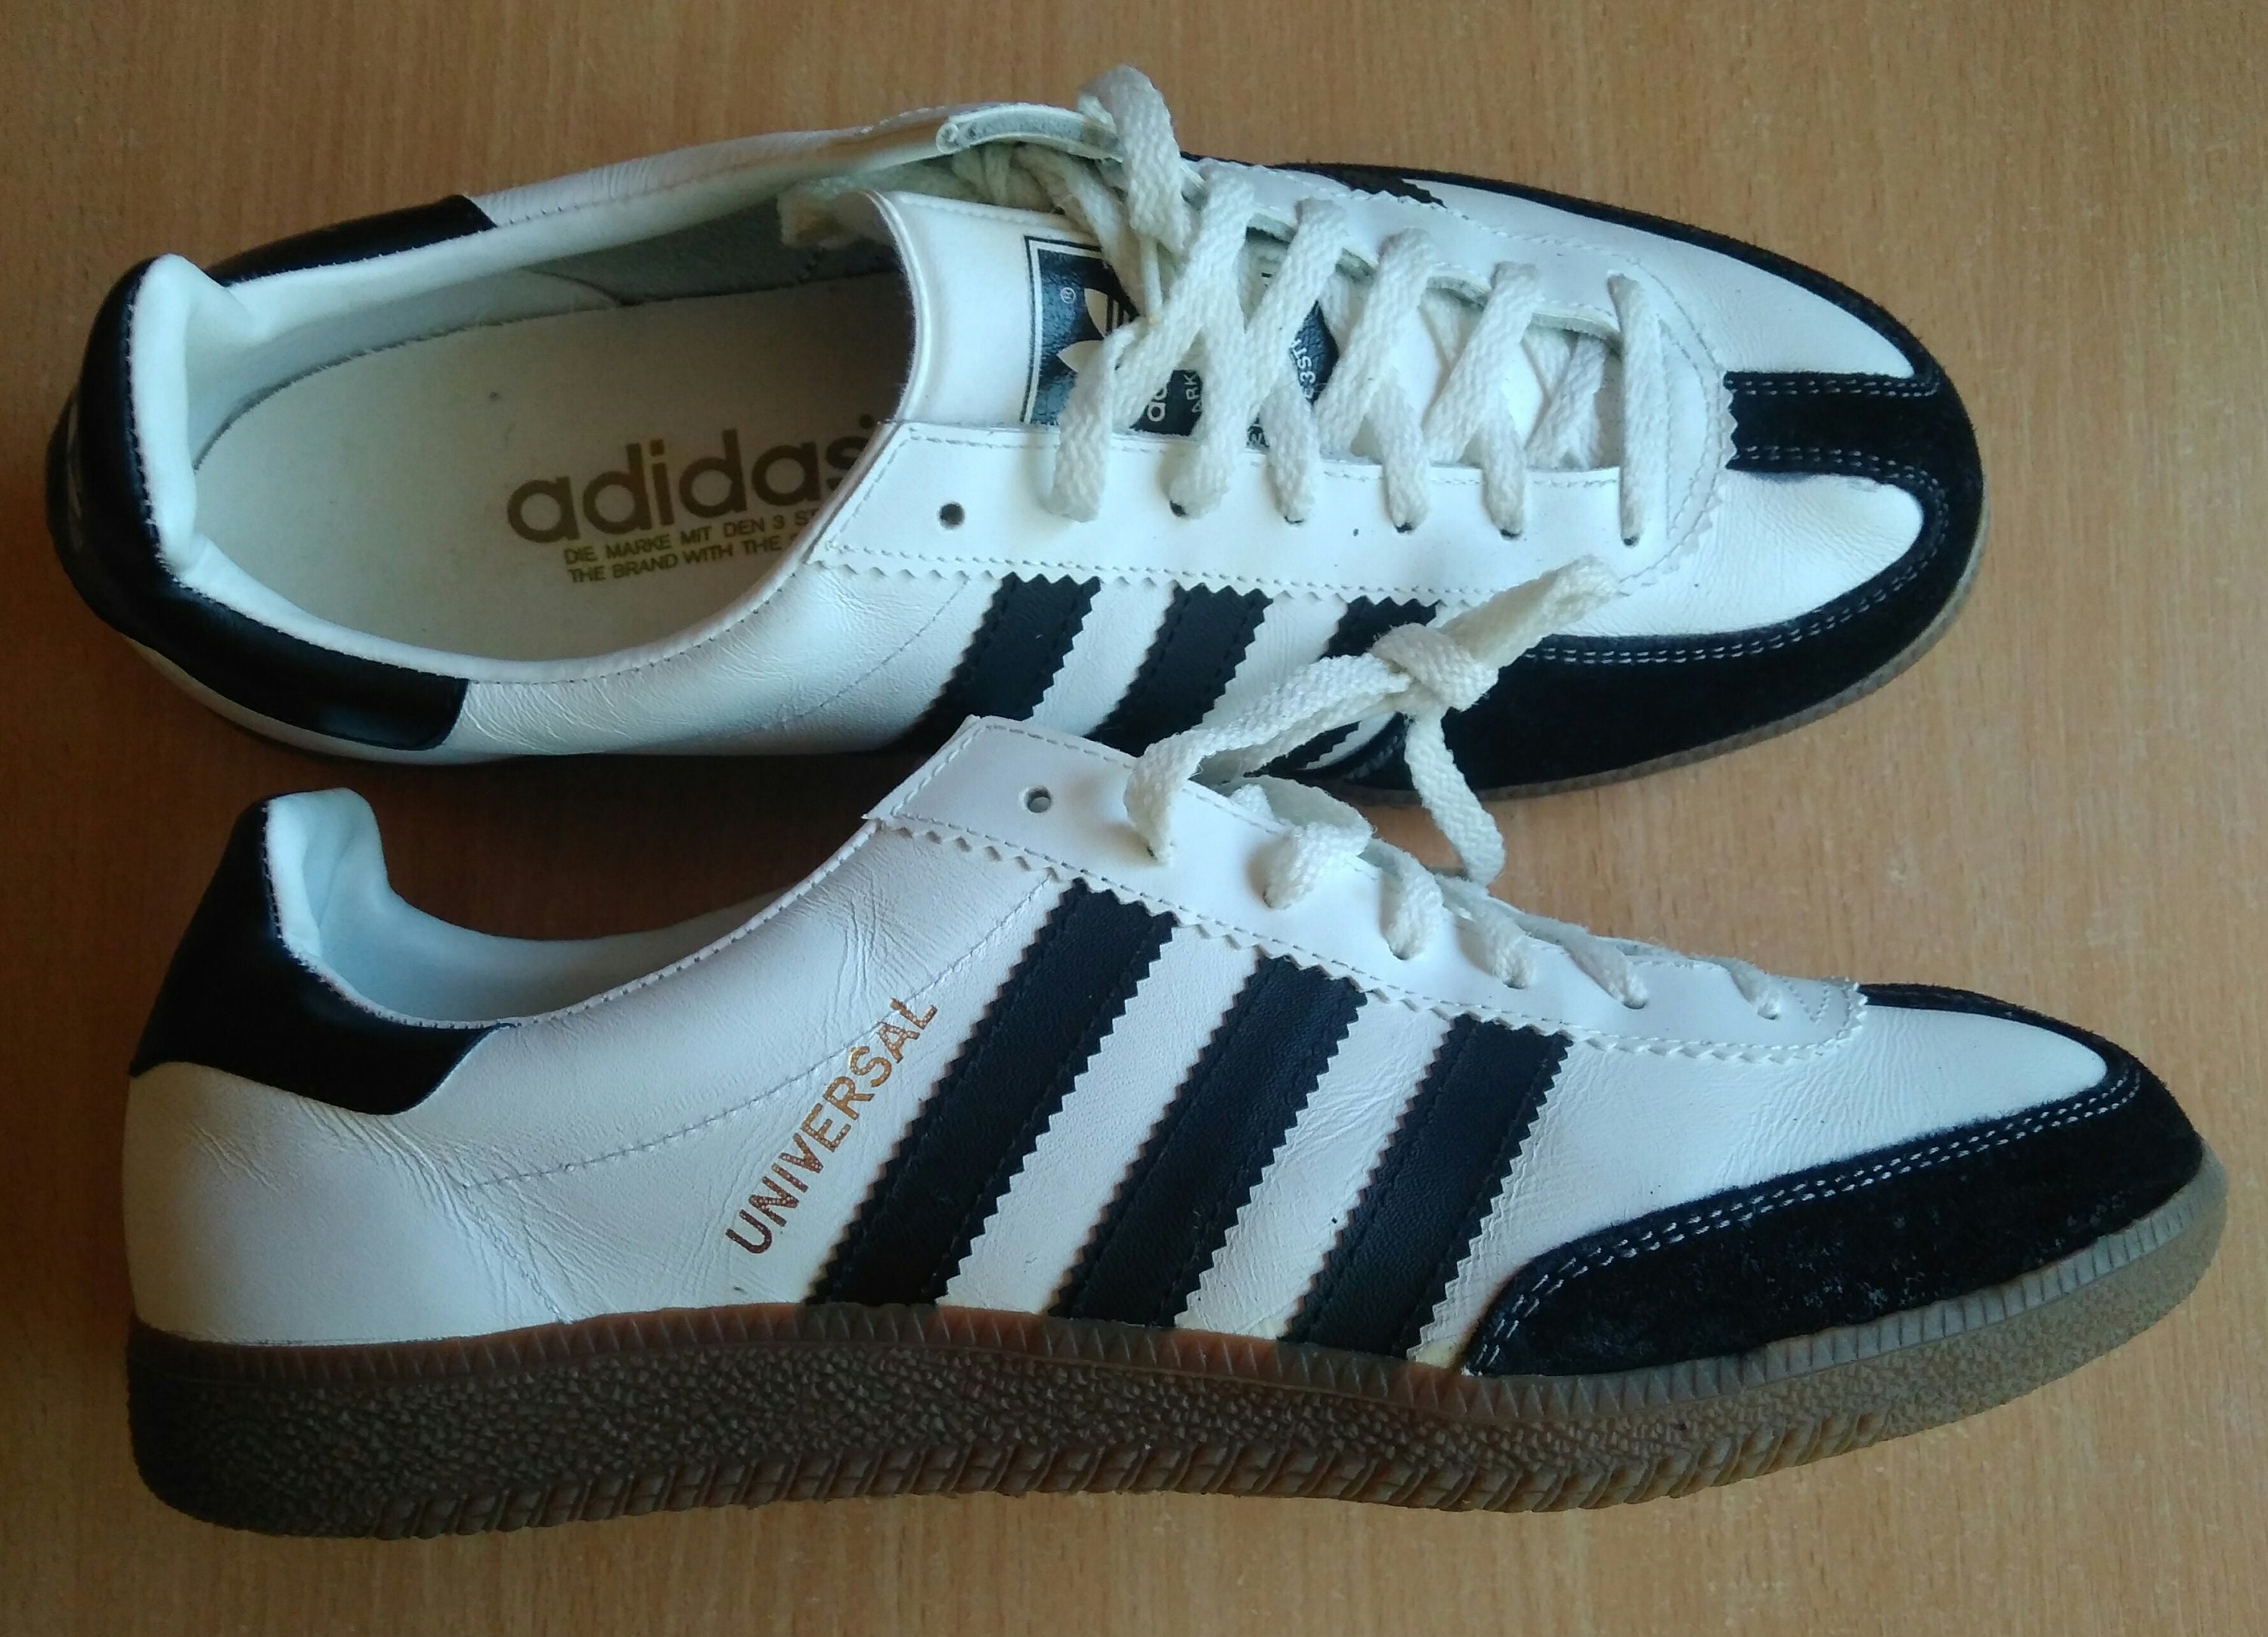 Adidas Universal Vintage Shoes Trainers 90s Made in Croatia